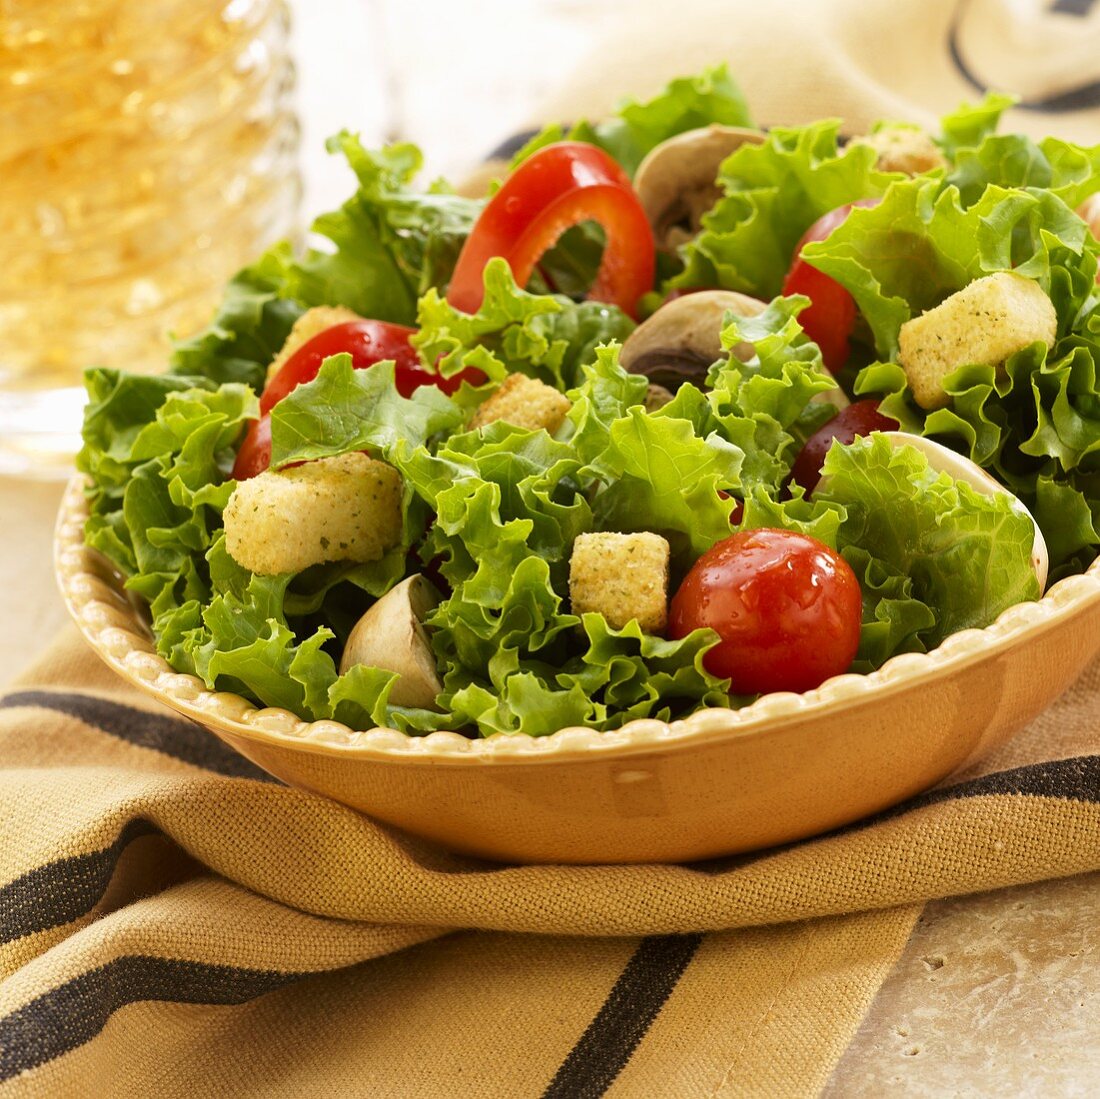 Leaf Lettuce Salad with Tomatoes and Croutons